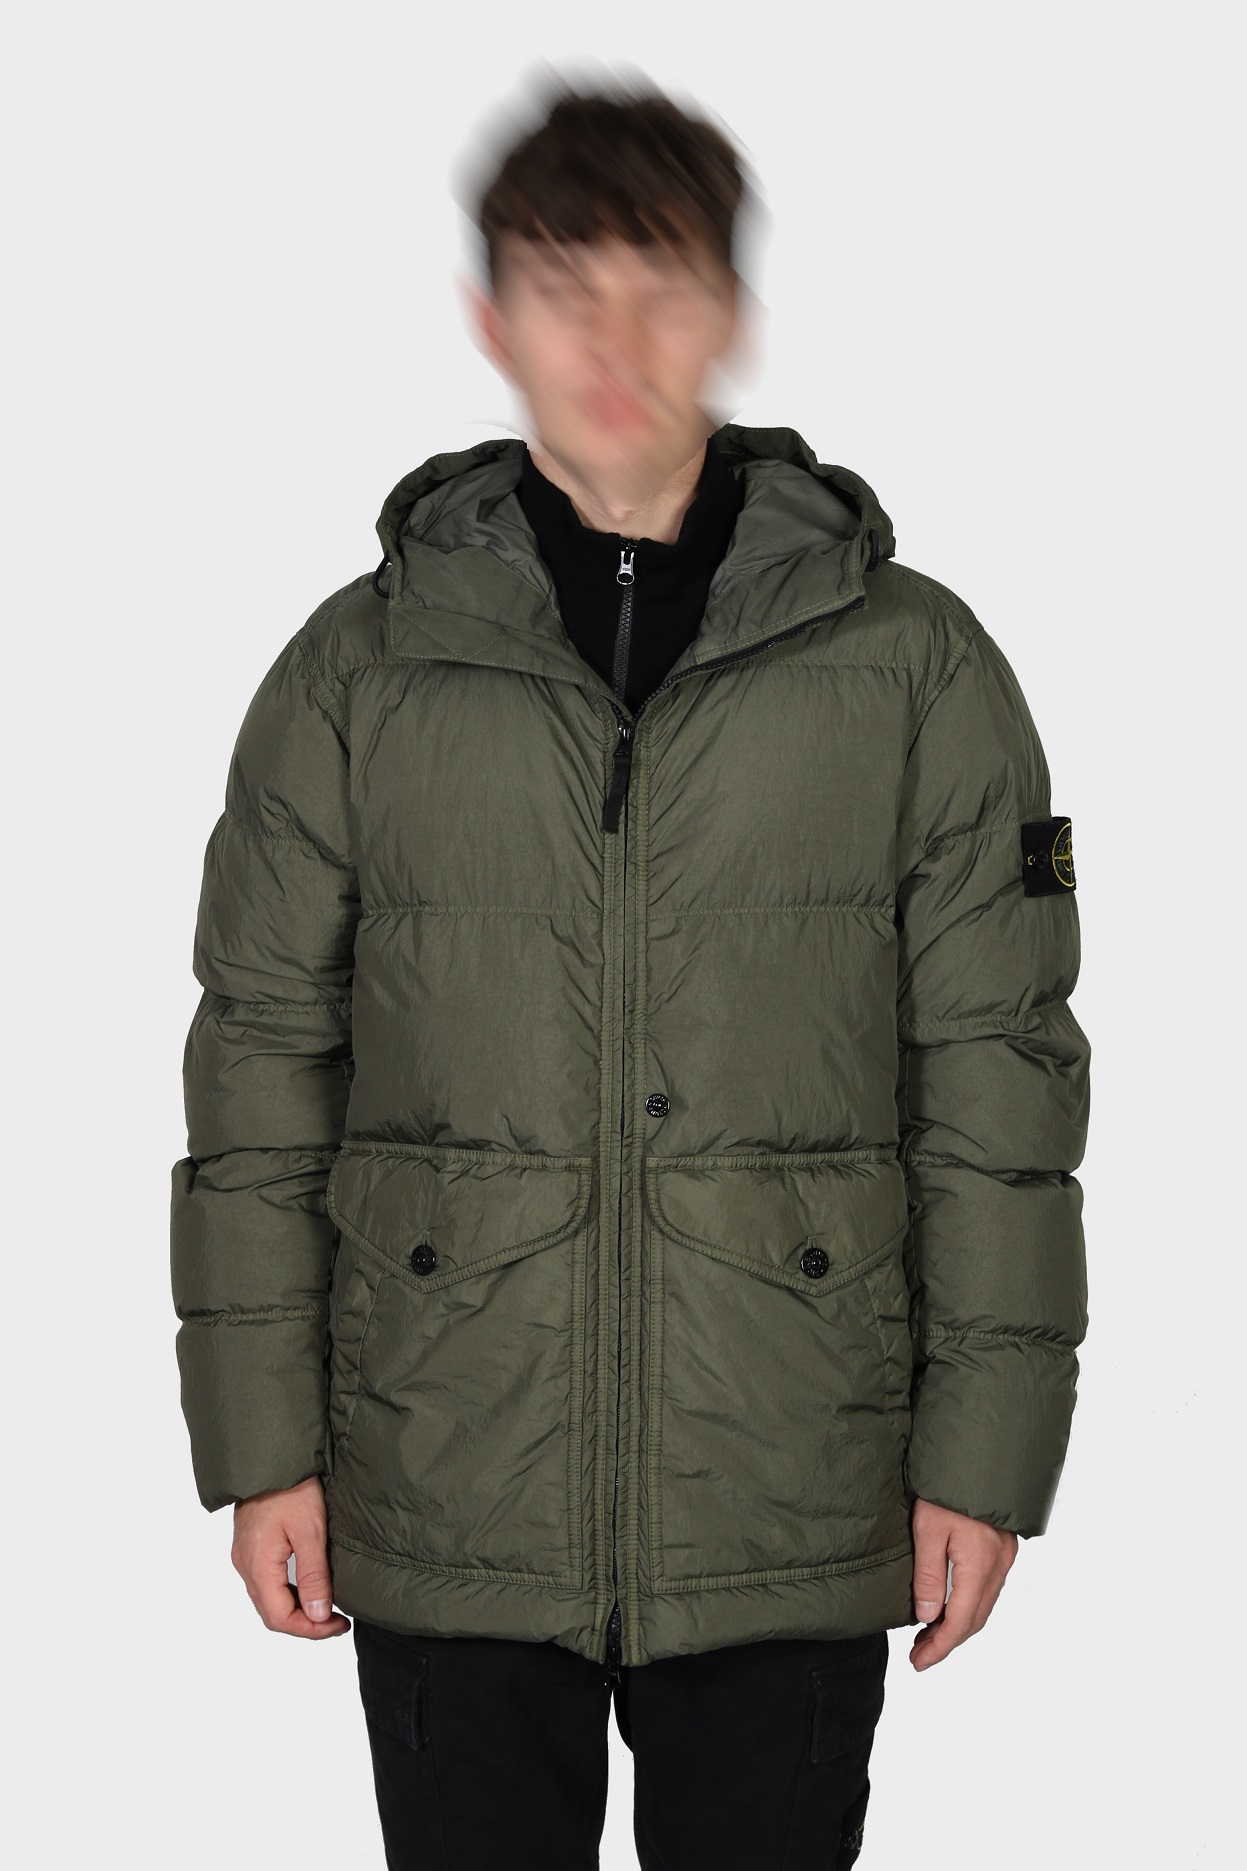 STONE ISLAND Garment Dyed Crinkle Reps Hooded Down Jacket in Olive